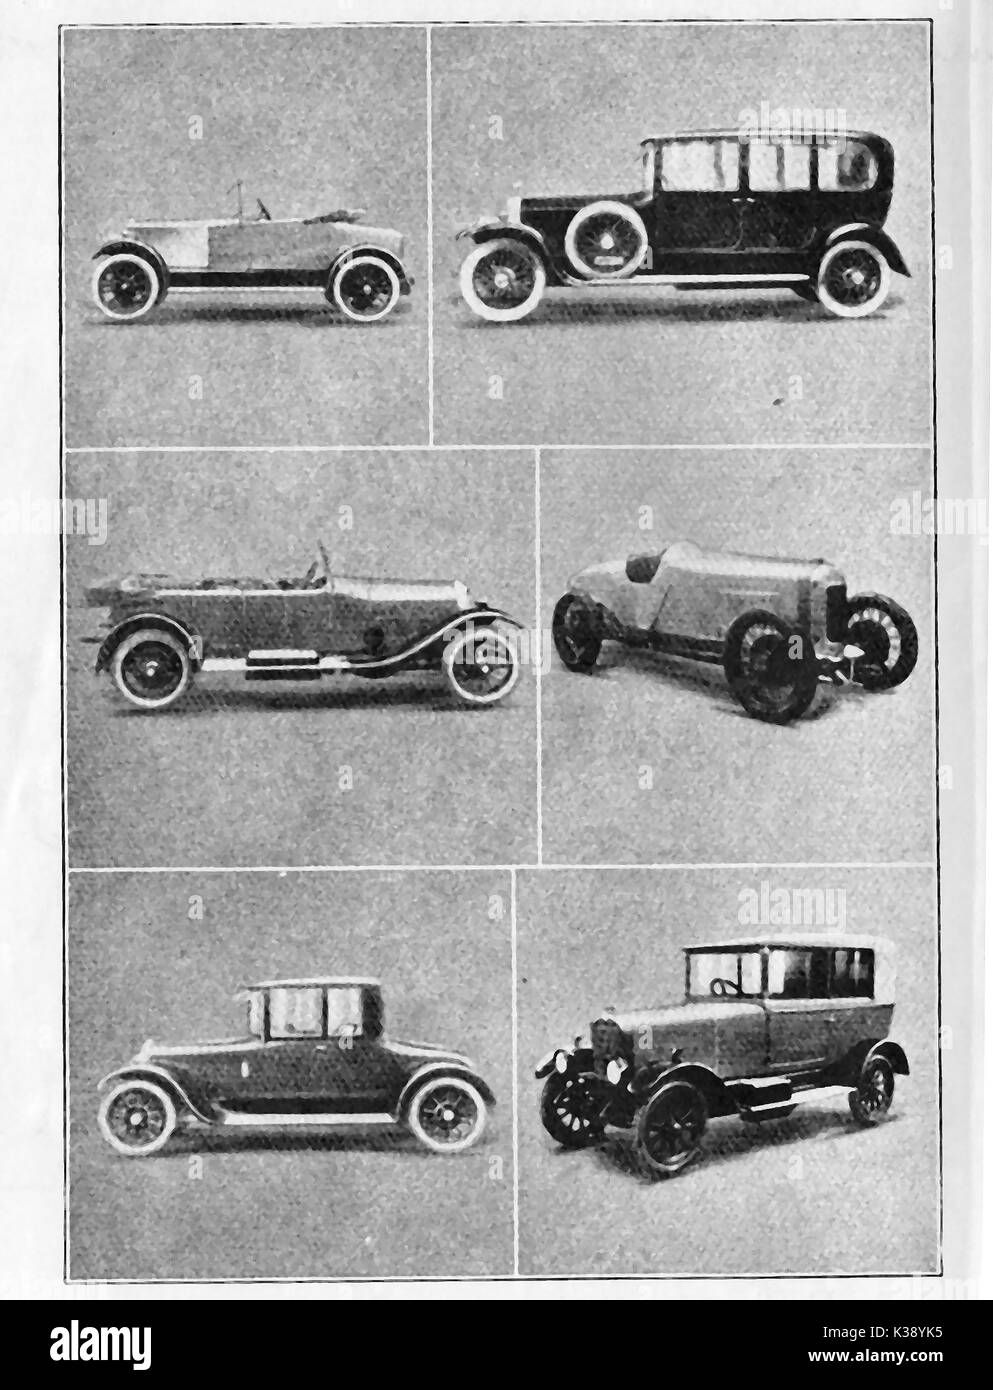 A selection of English automobiles of the 1920's from a 1924 illustration  - l to r  Charron Laycock -Roll's Royce saloon -Bentley Tourer - Sunbeam racer - Sunbeam coupe -Hillman 'all weather' Stock Photo